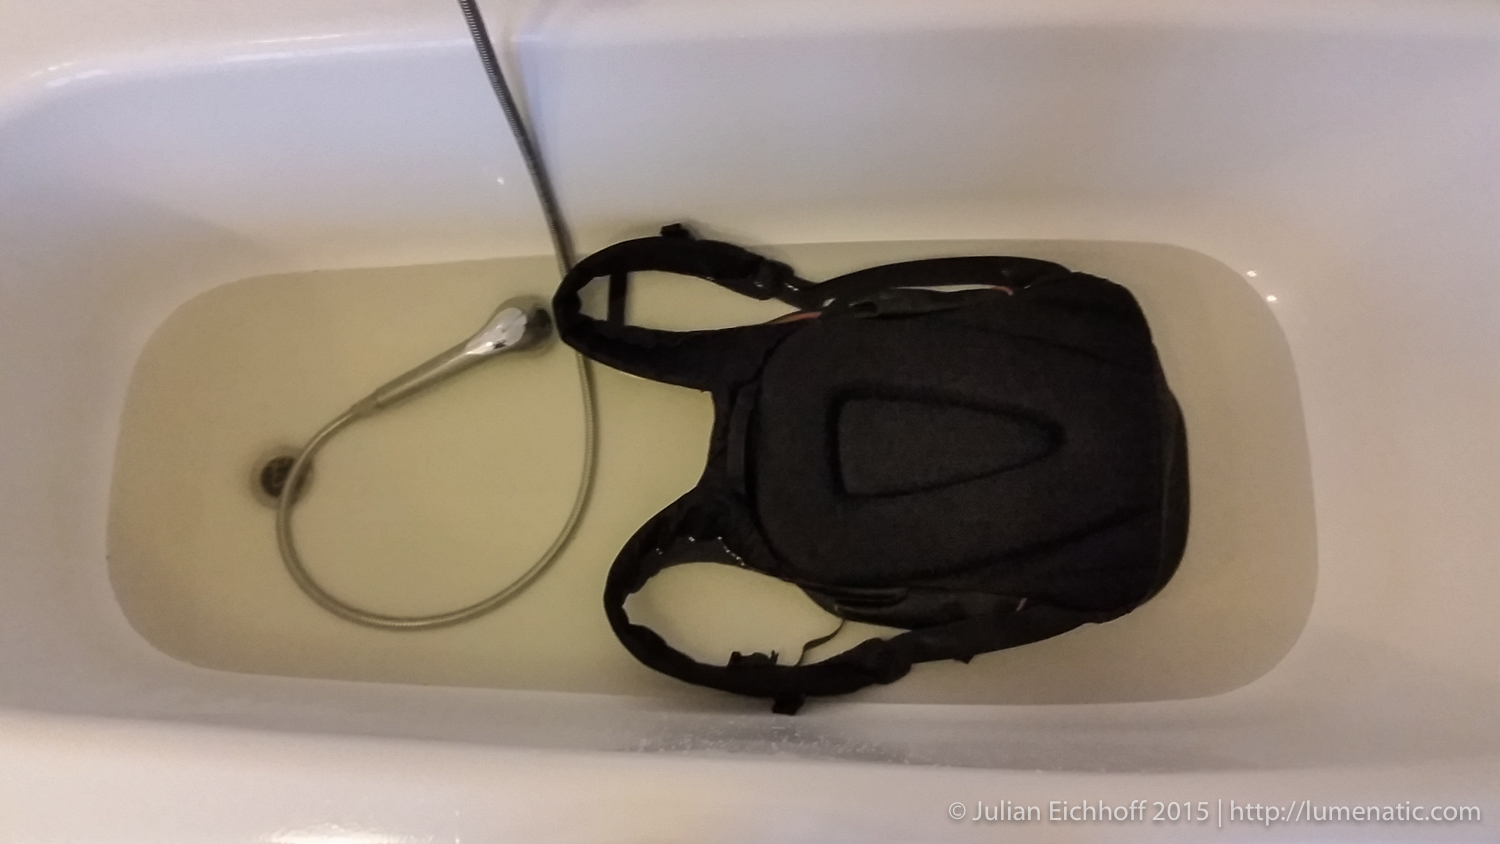 Washing a backpack (because a dog peed on it)